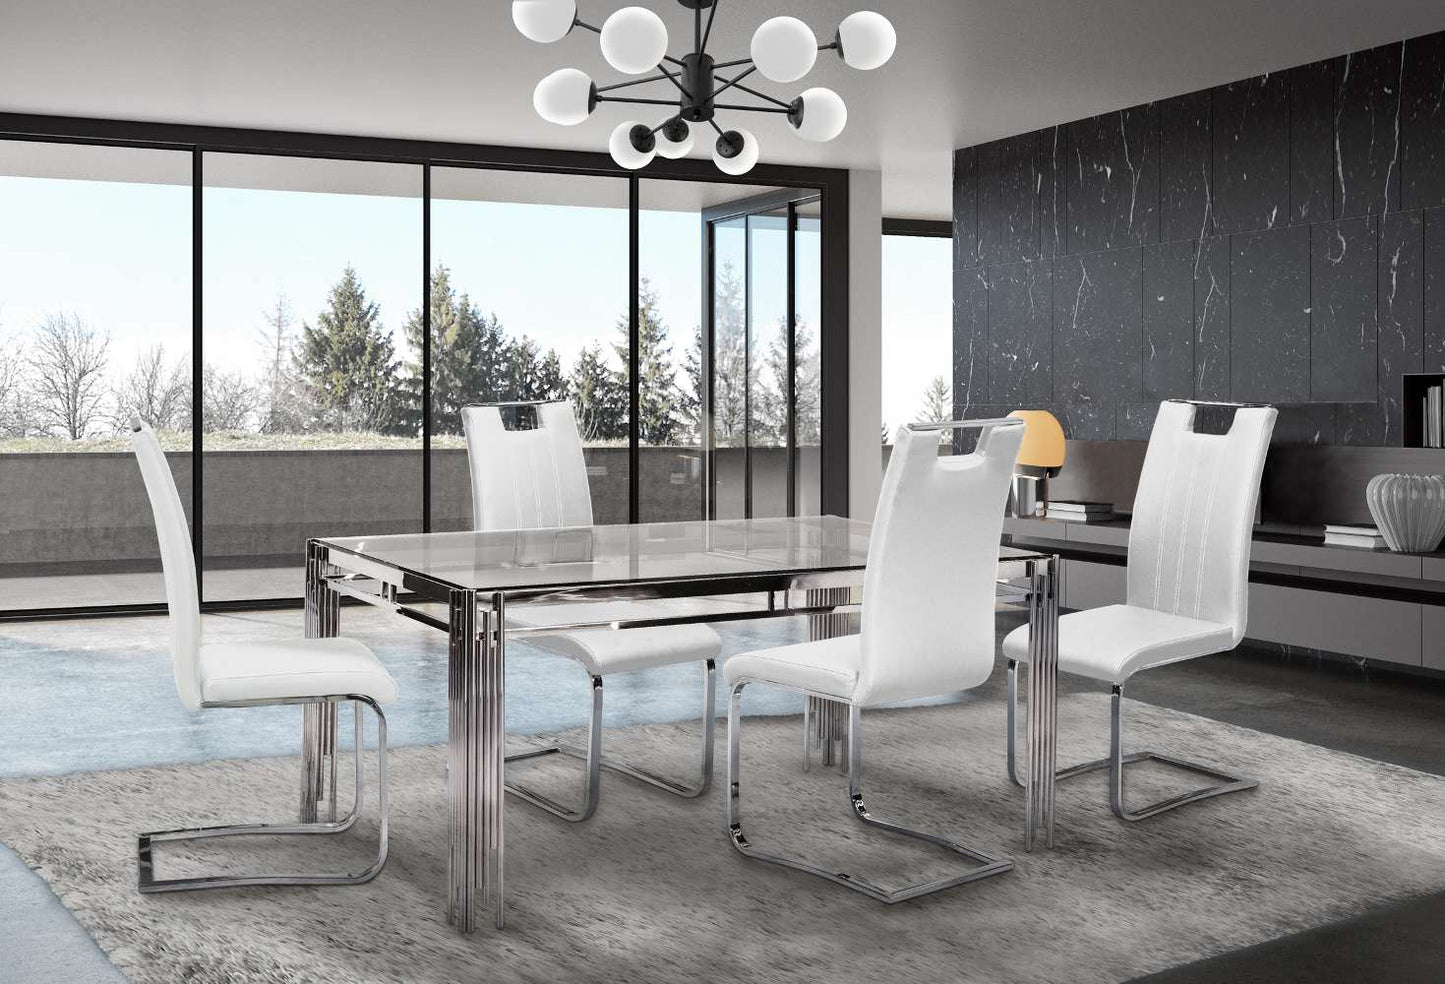 Dining Set Table with Chairs - Valencia Collection